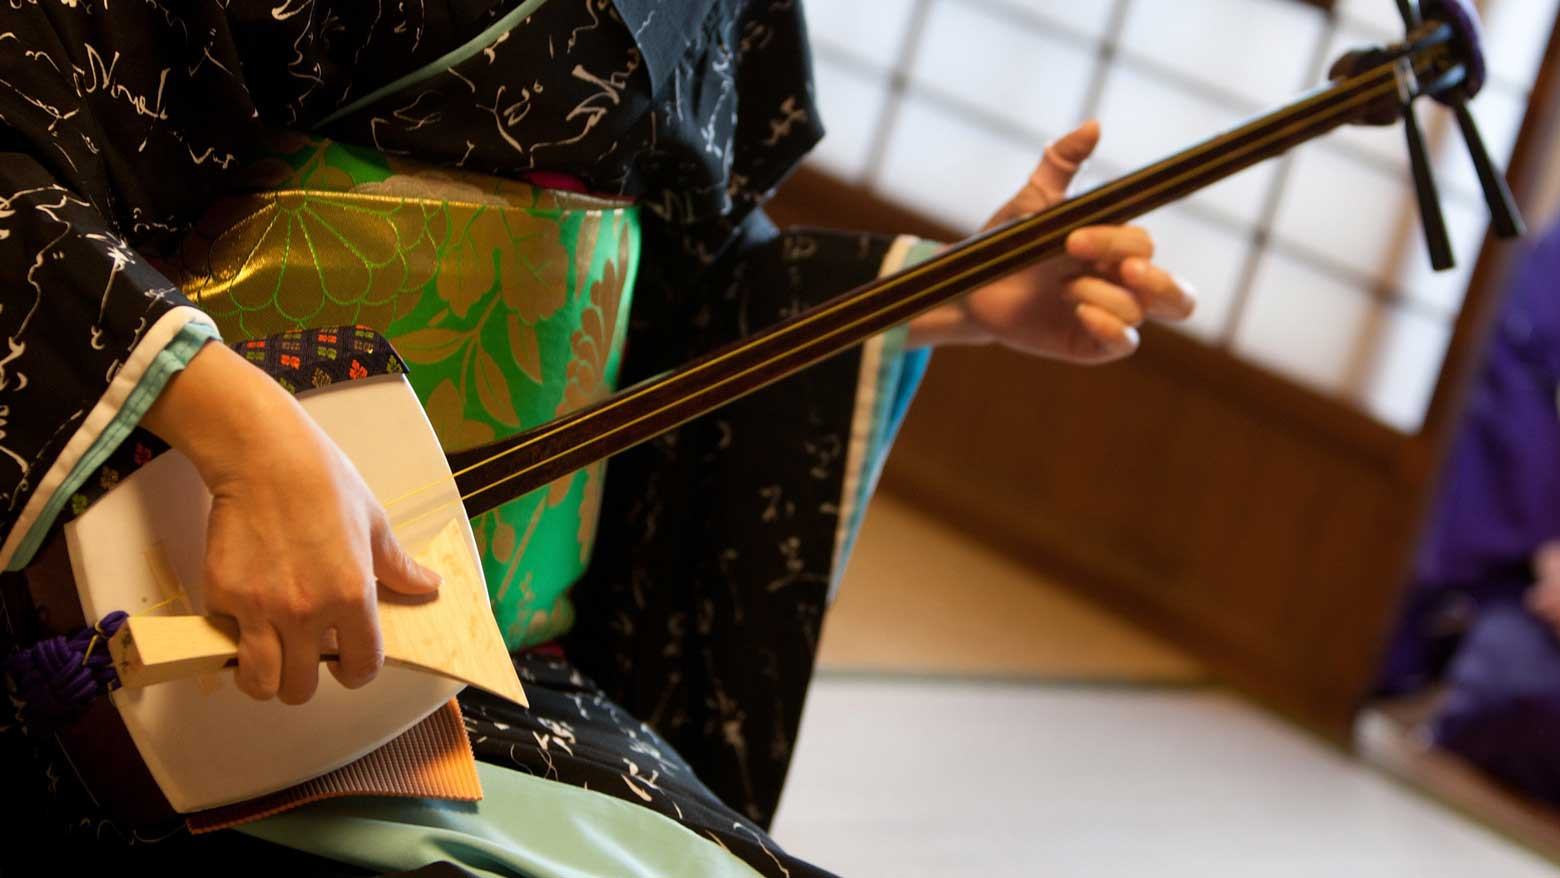 Japan's shamisen faces a fight for survival